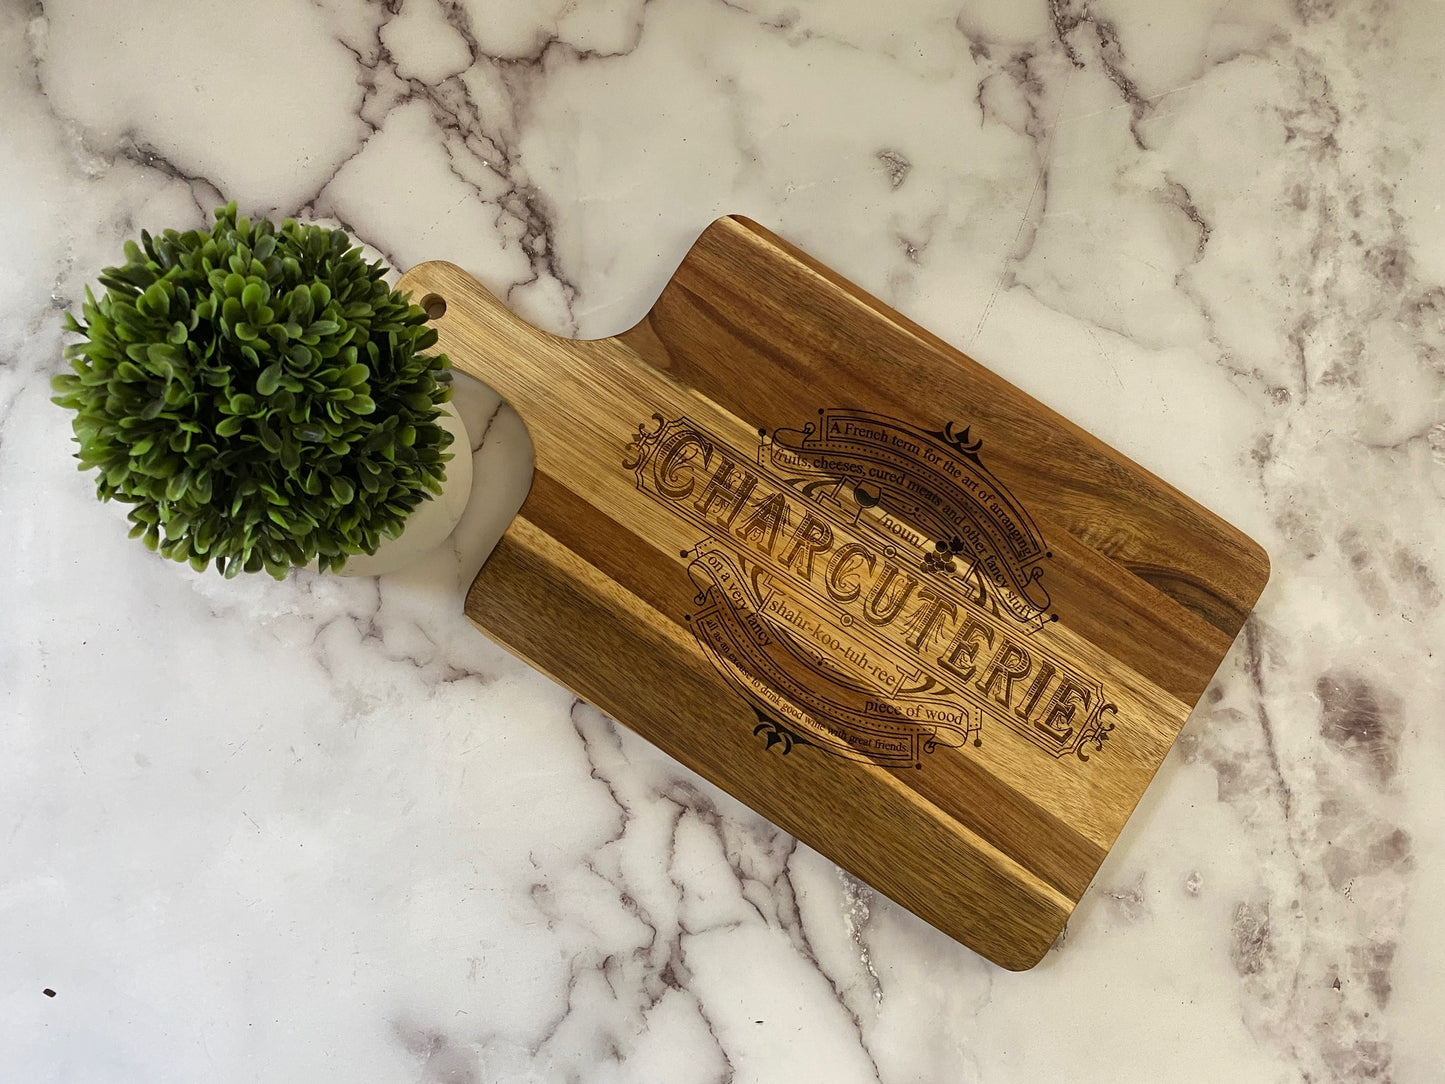 Vintage look "Definition of Charcuterie" paddle charcuterie board